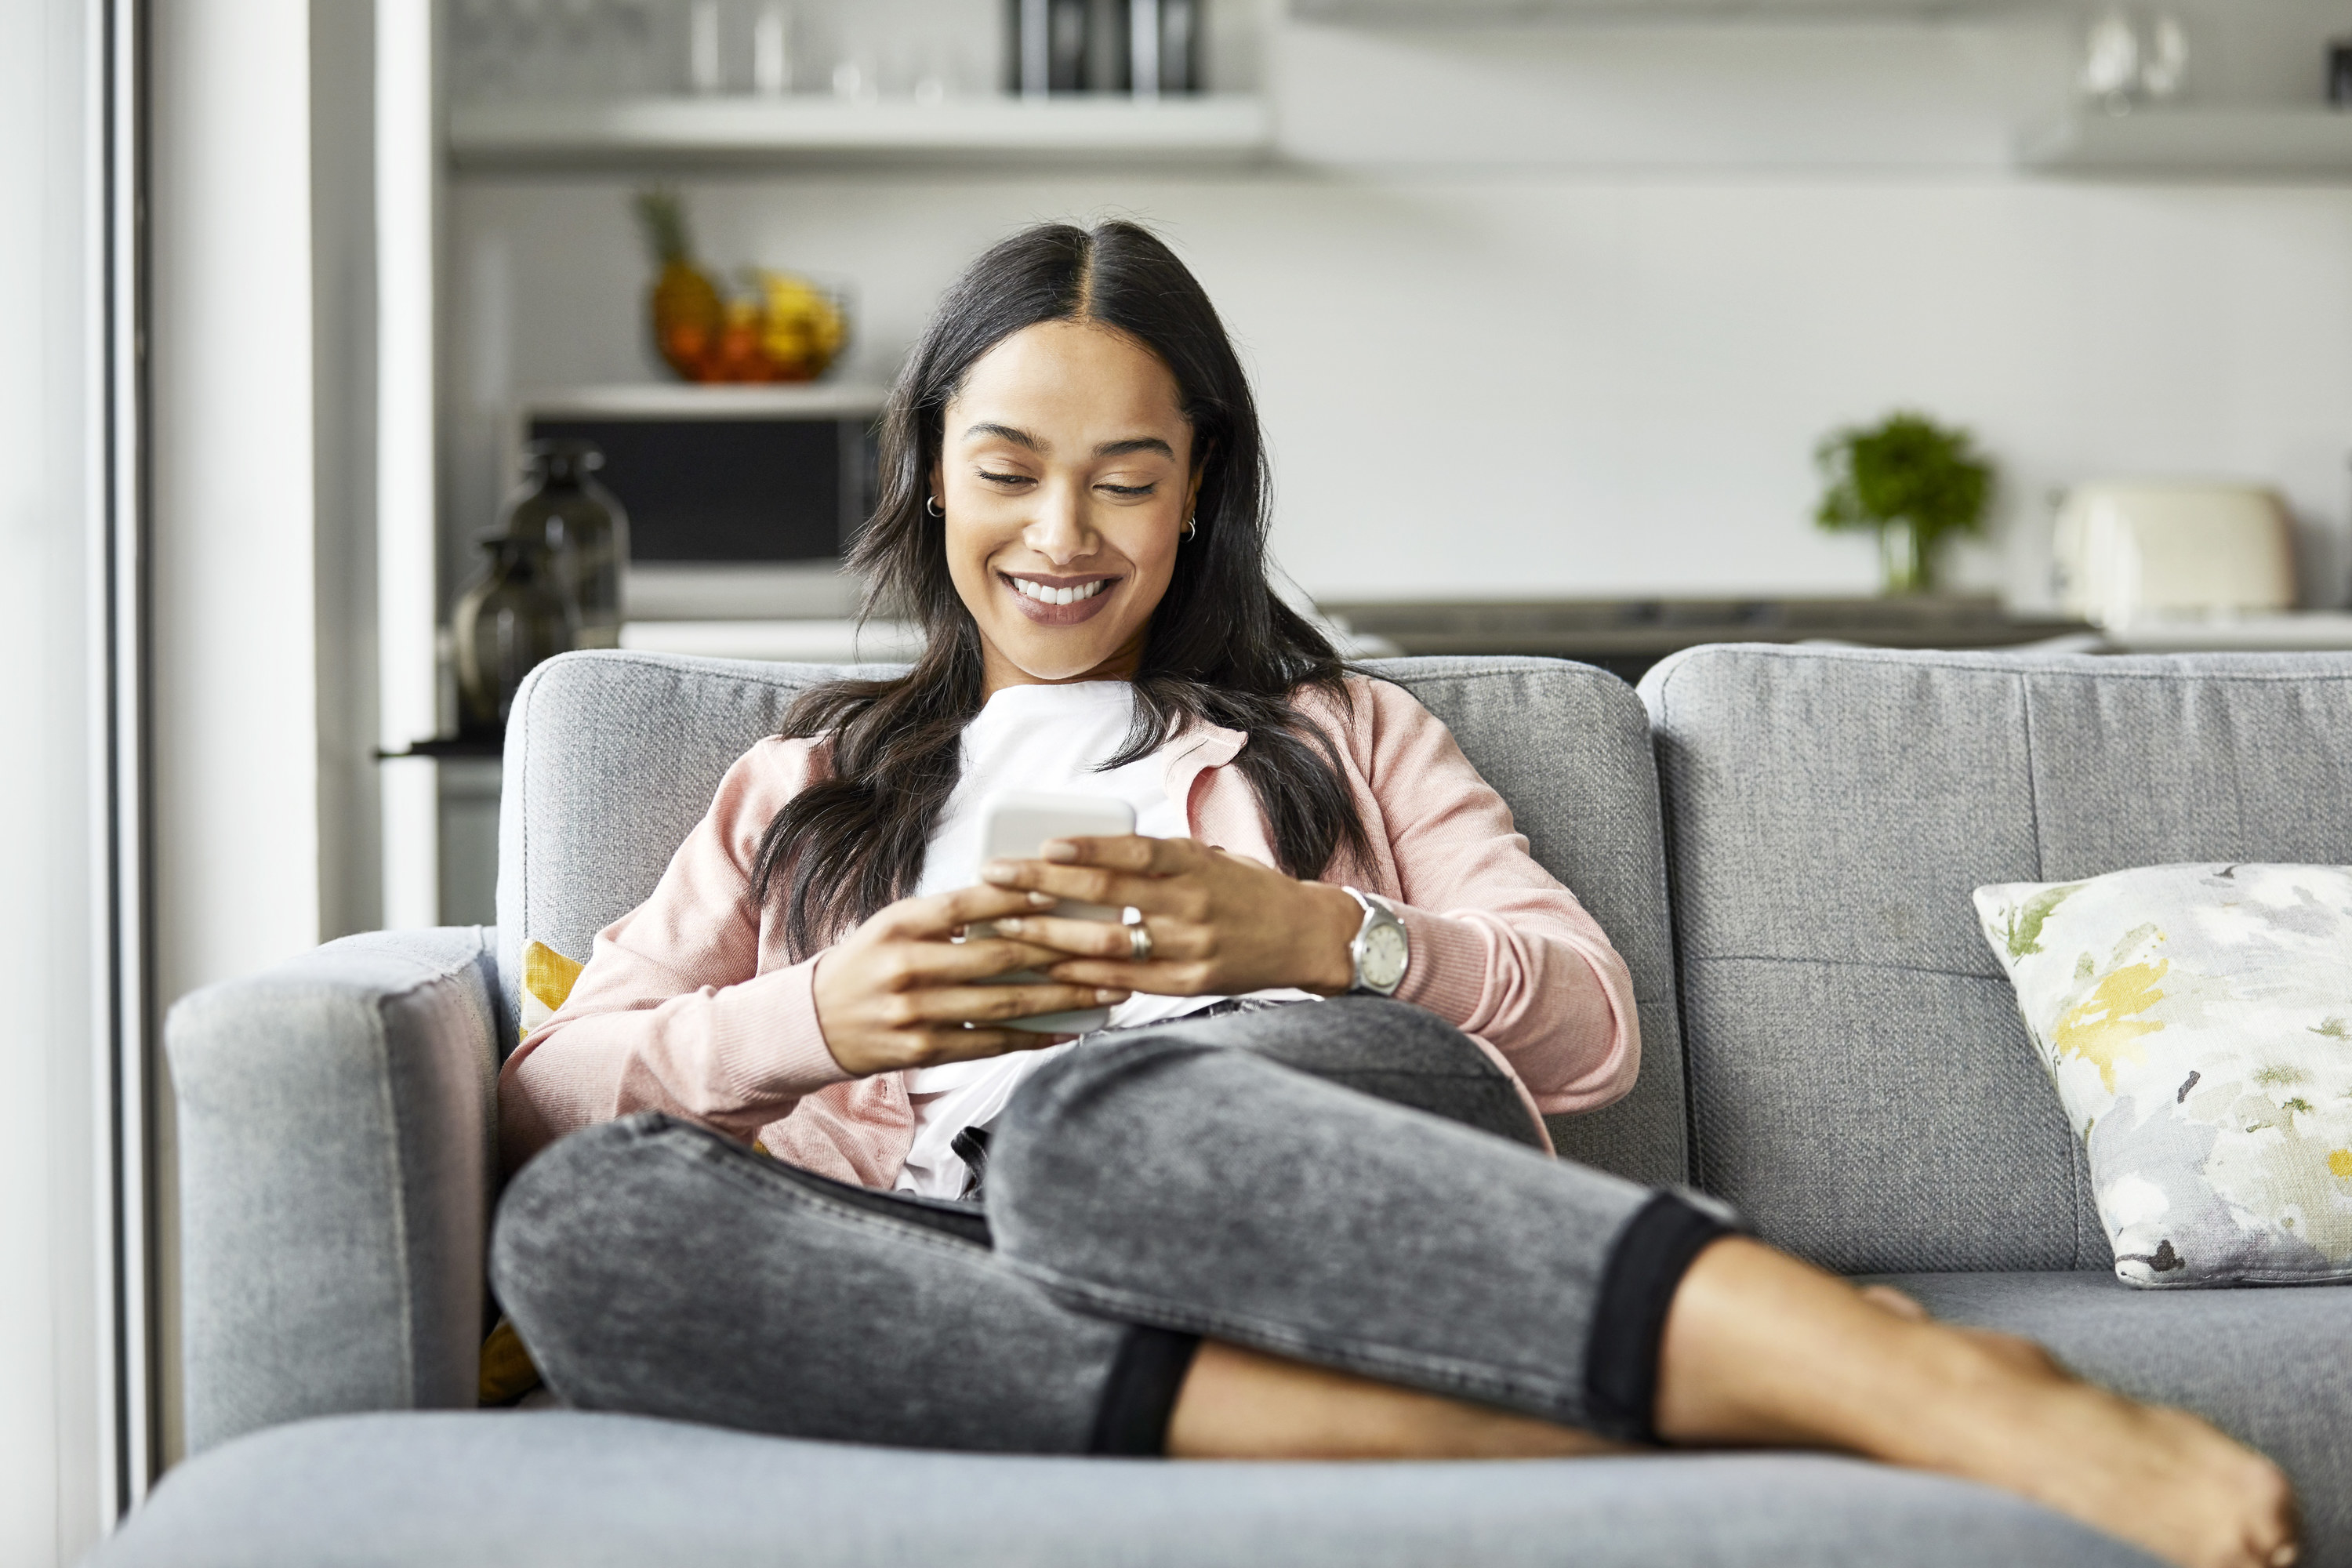 A woman smiles as she sits on her couch and checks her phone